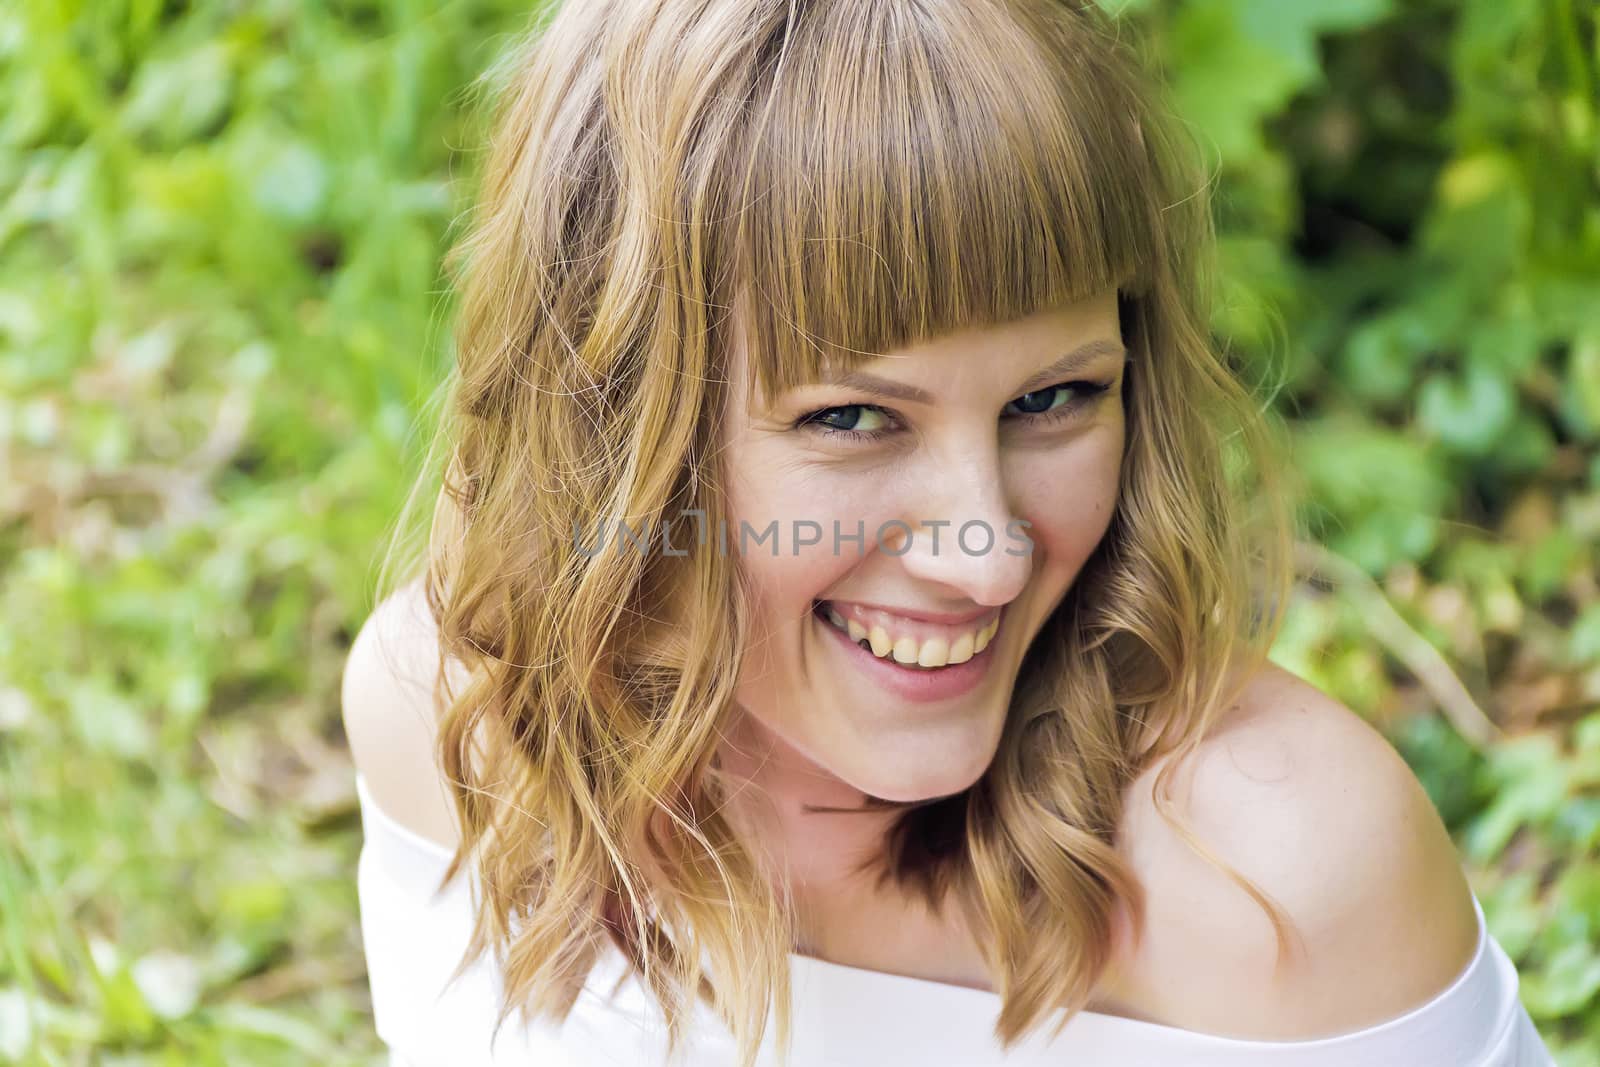 Portrait of laughing young woman with blond hair in sunlight
